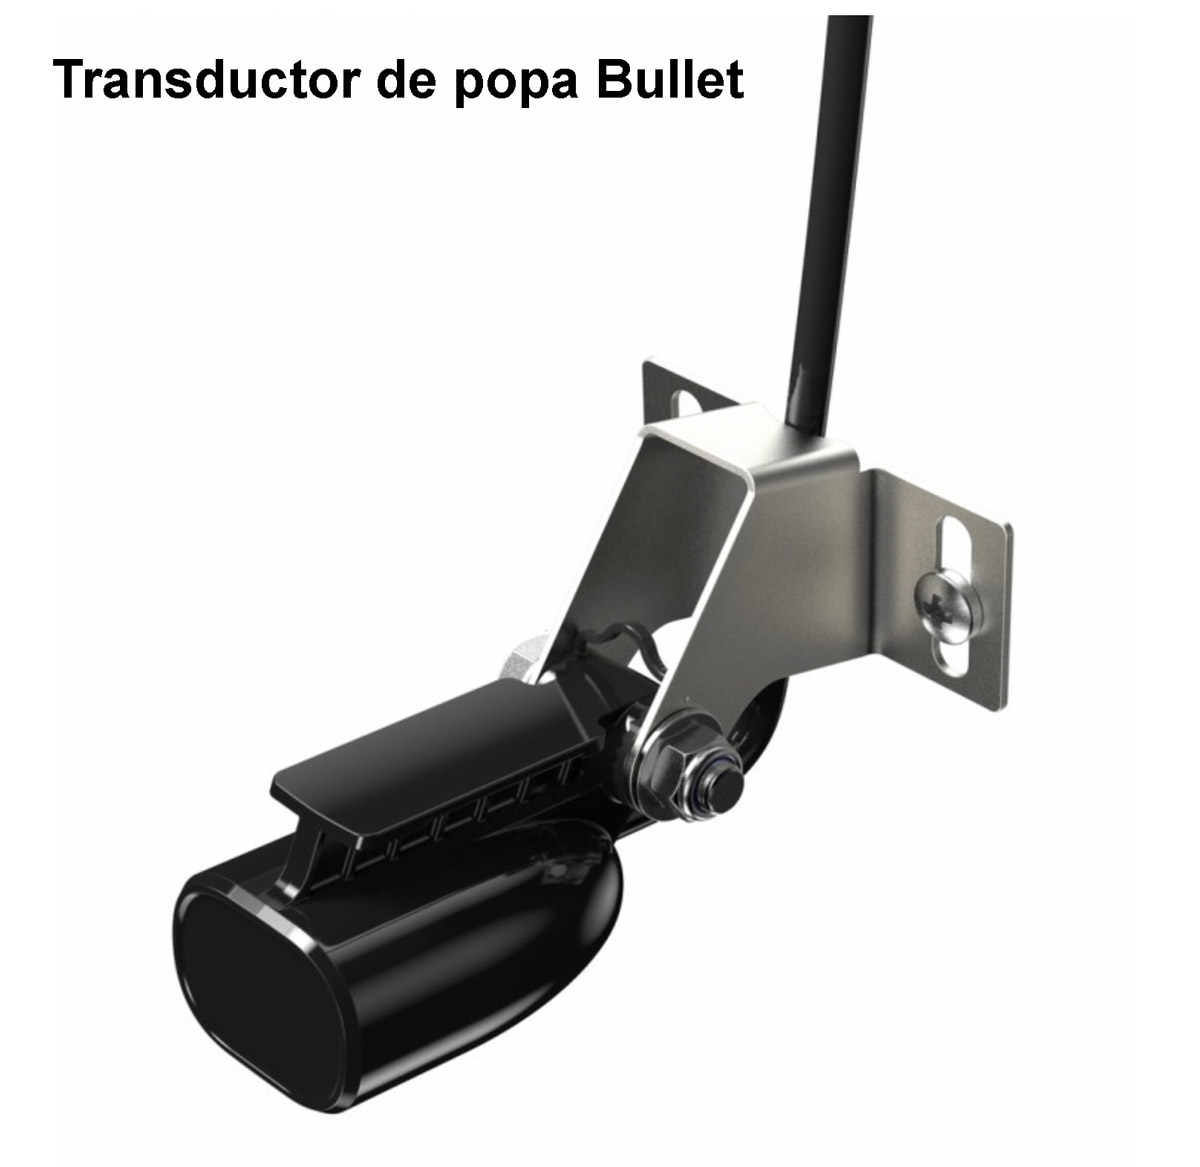 Transductor Lowrance Bullet